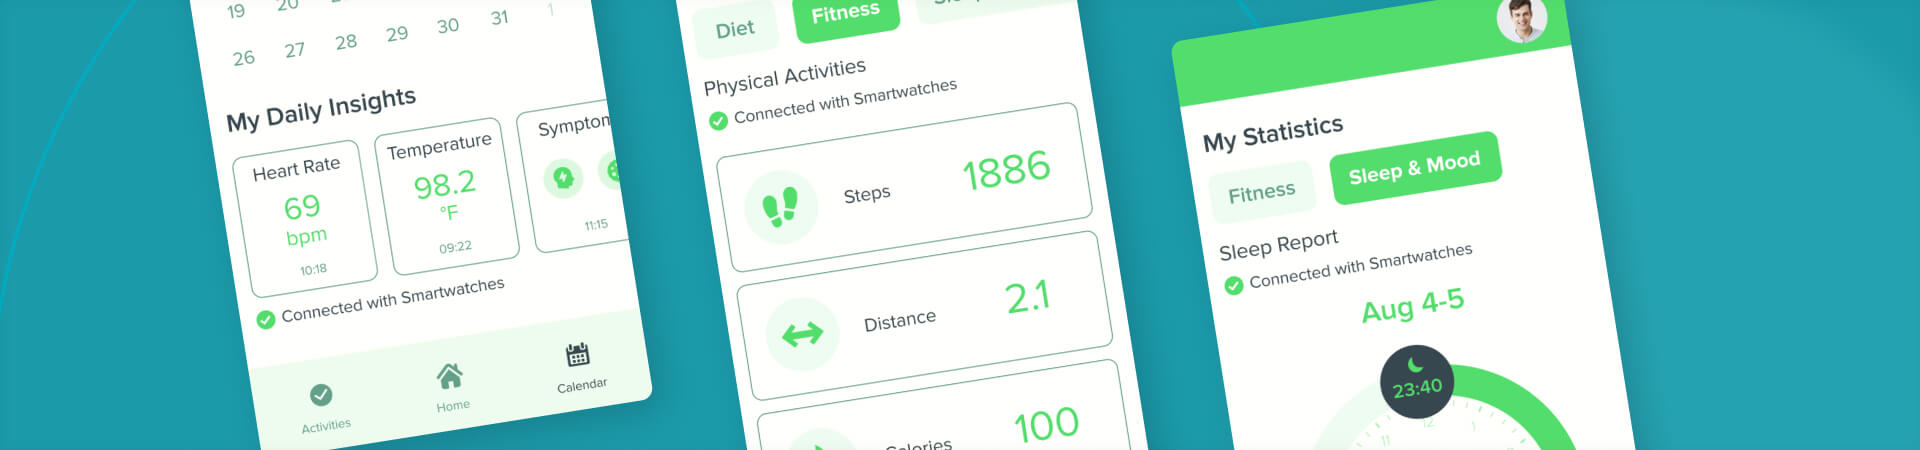 New Features and a Smartwatch App to Increase MAU of a Health Tracking App by 15%